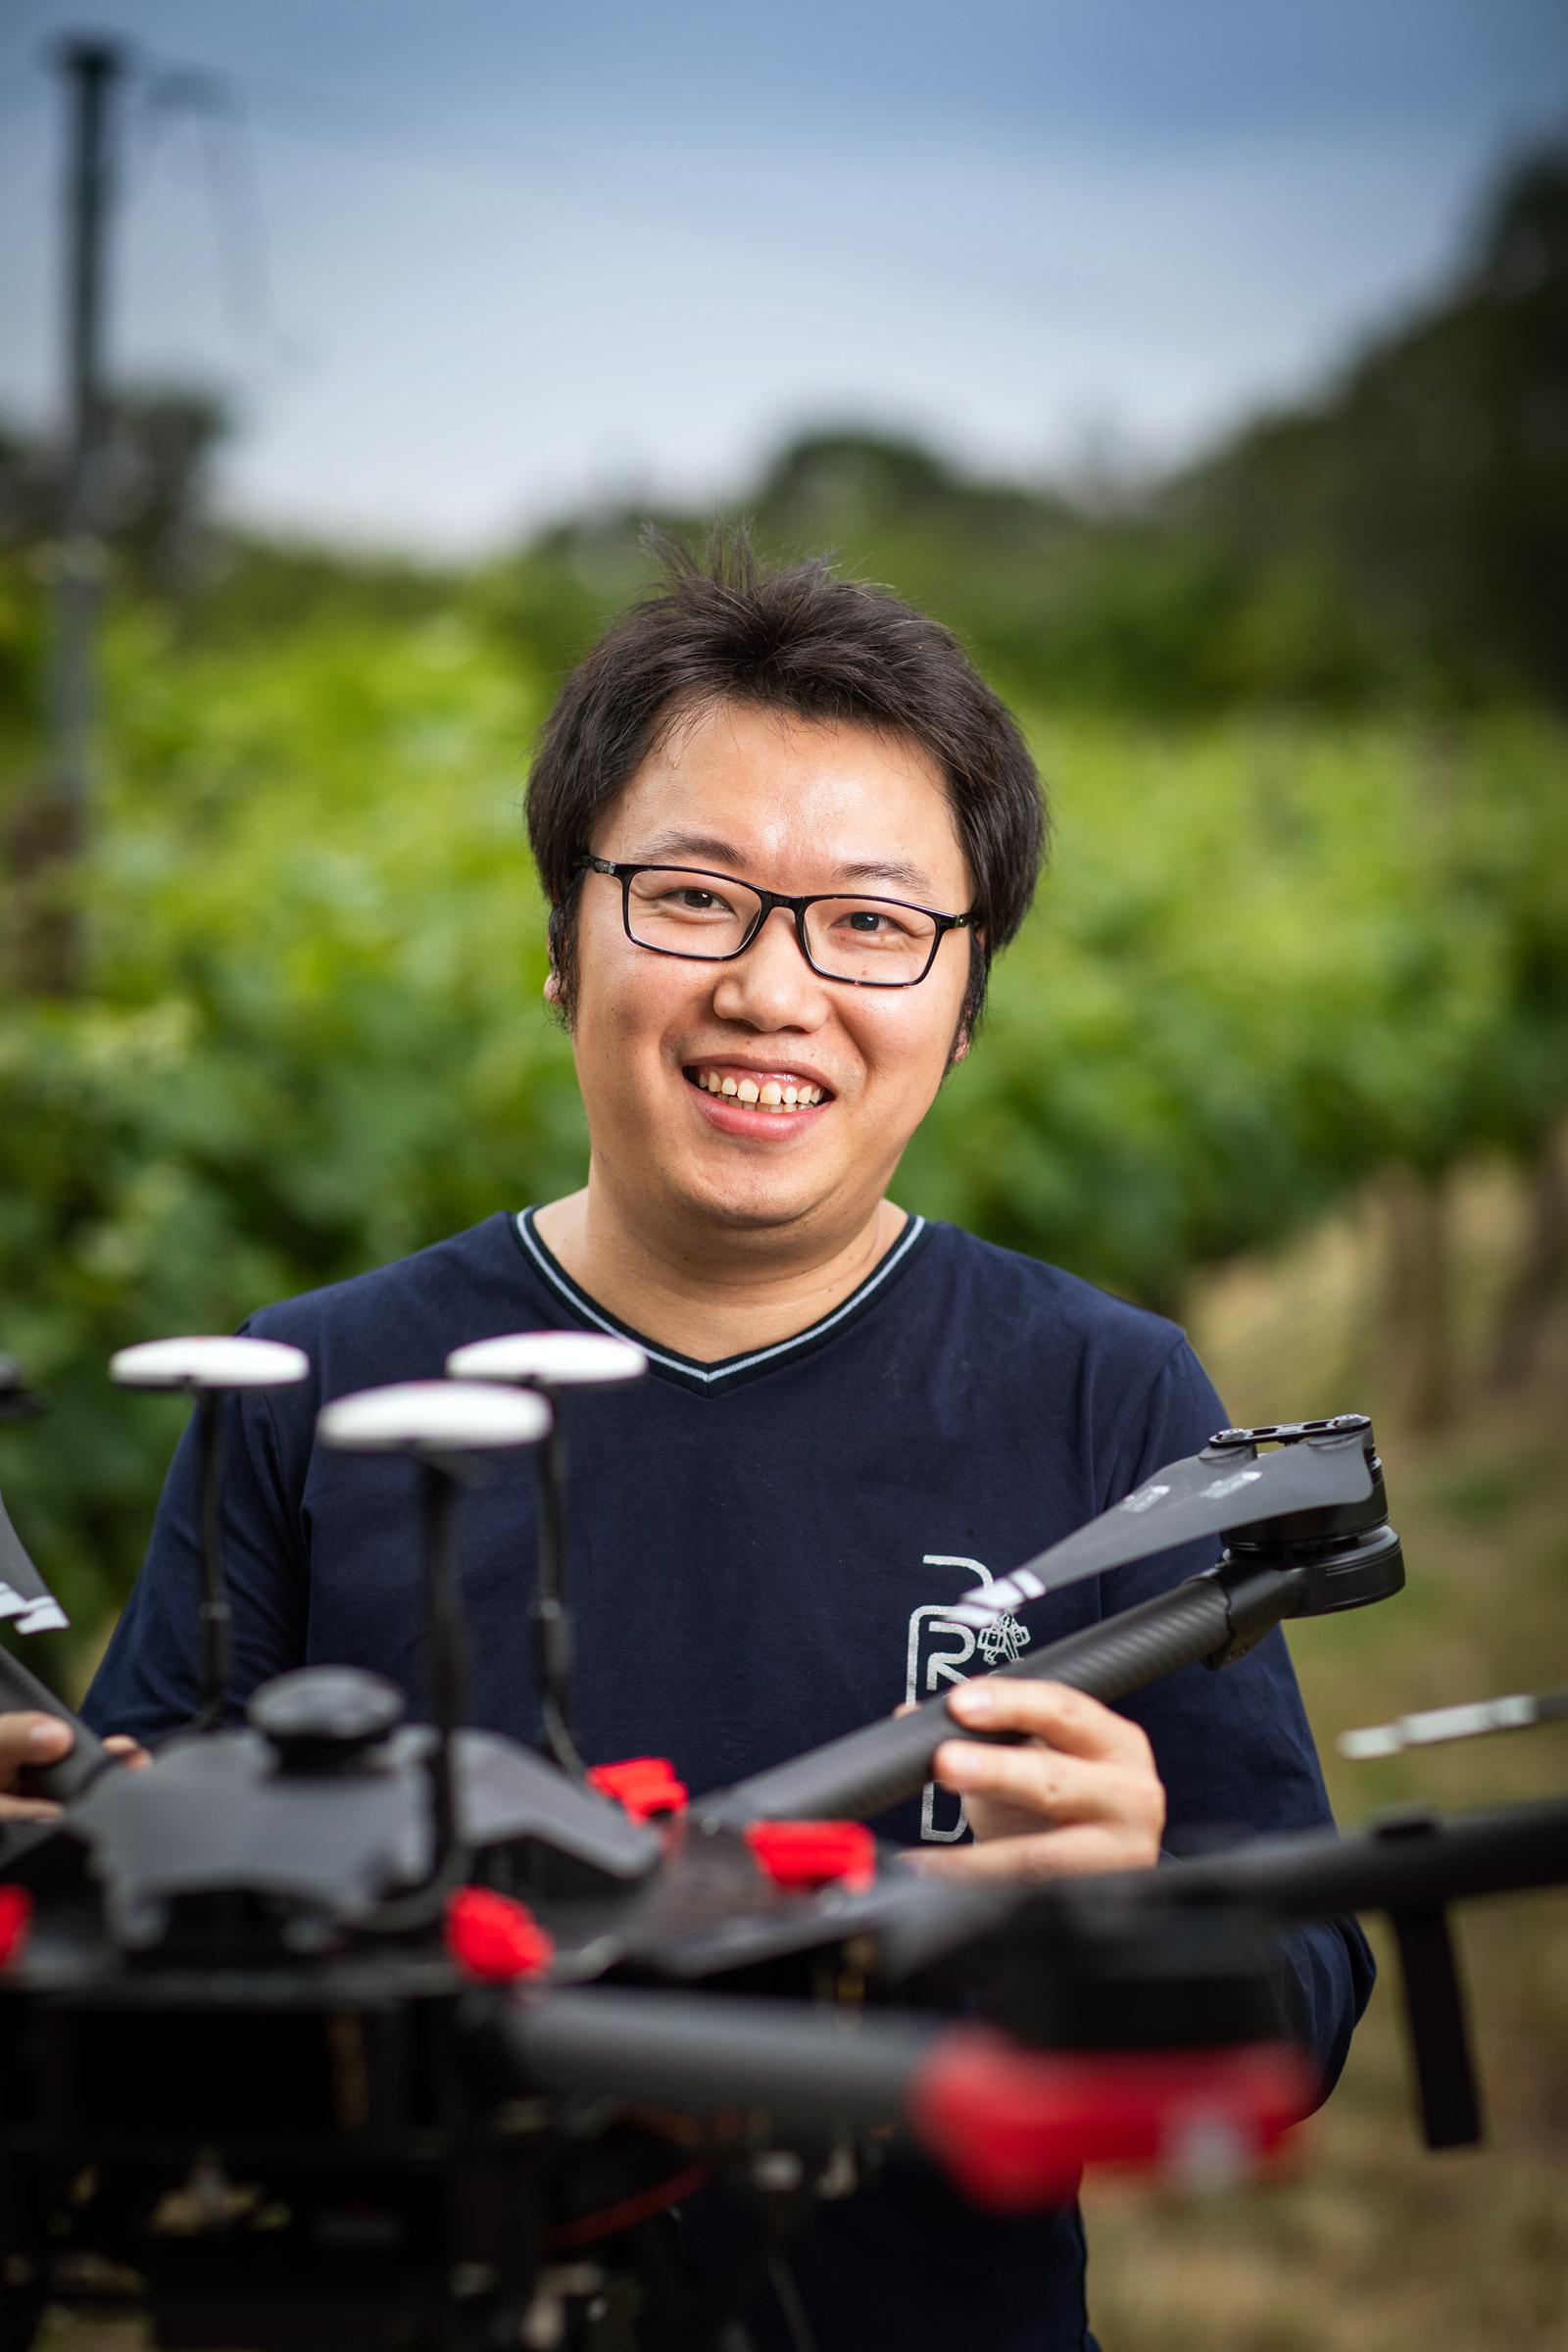 Mickey Wang - Detecting grapevine diseases with drones